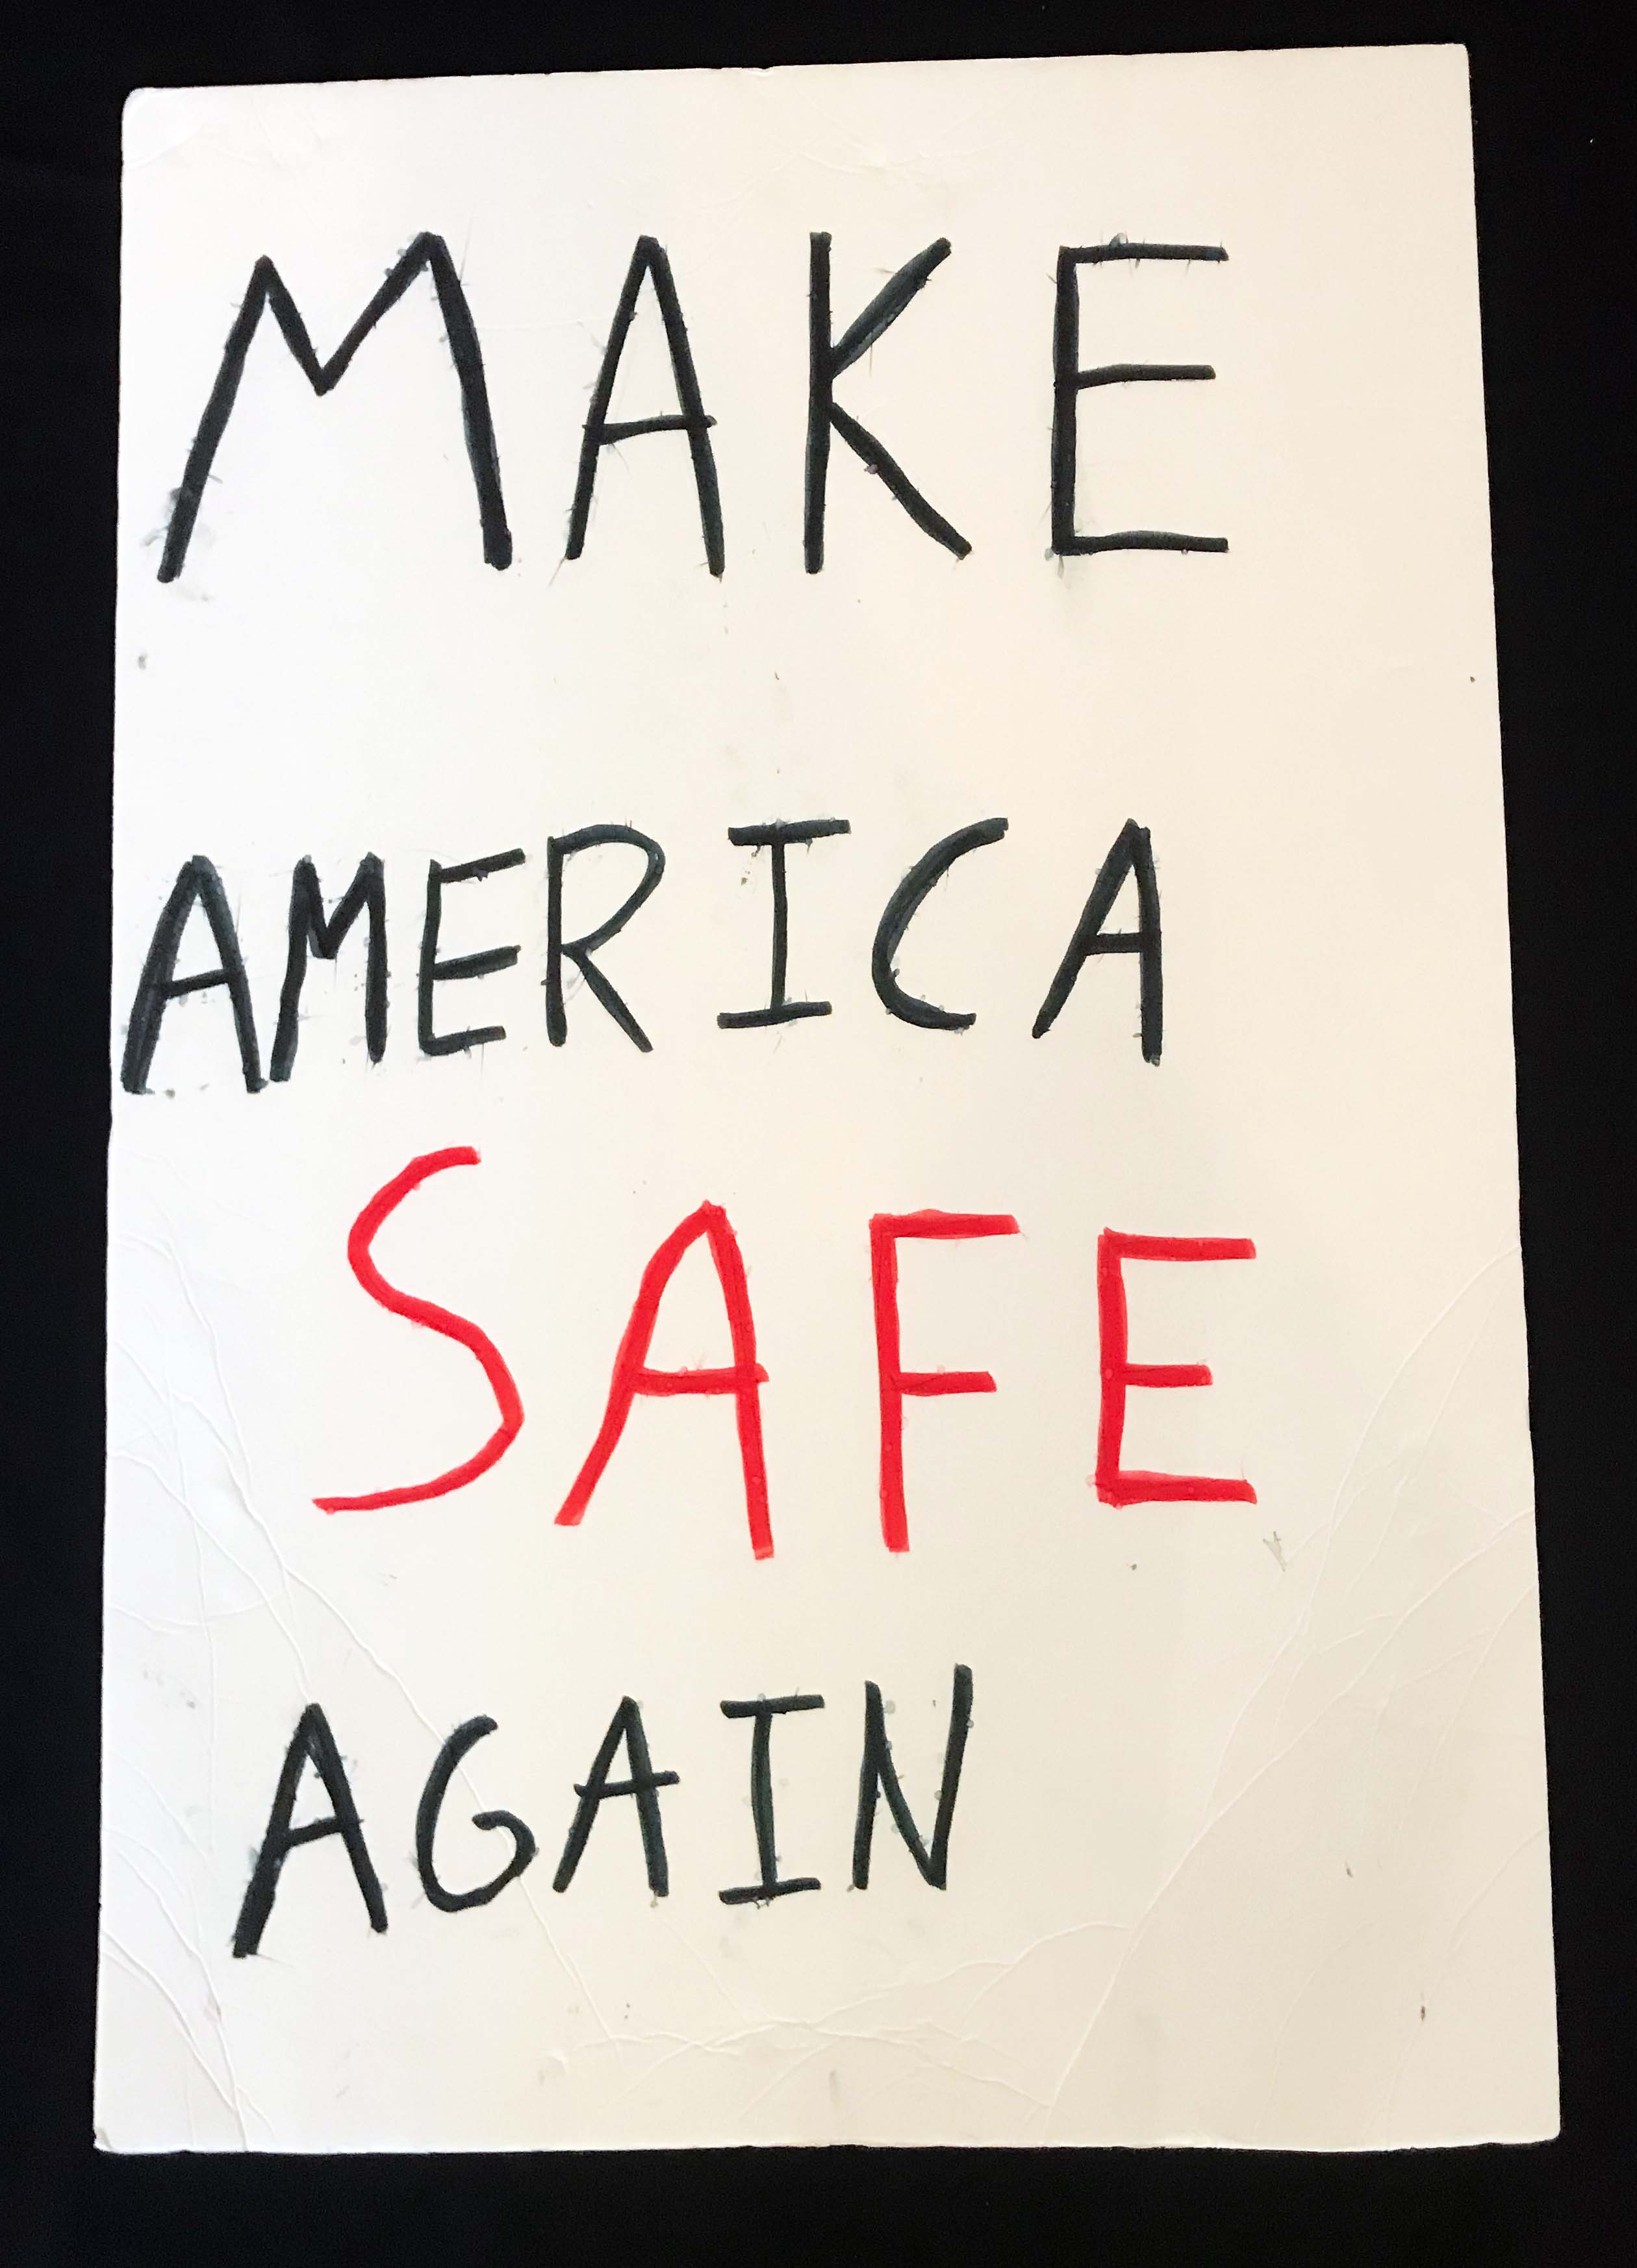 Charlotte March for Our Lives, 2018. Sign reads: "Make America safe again."